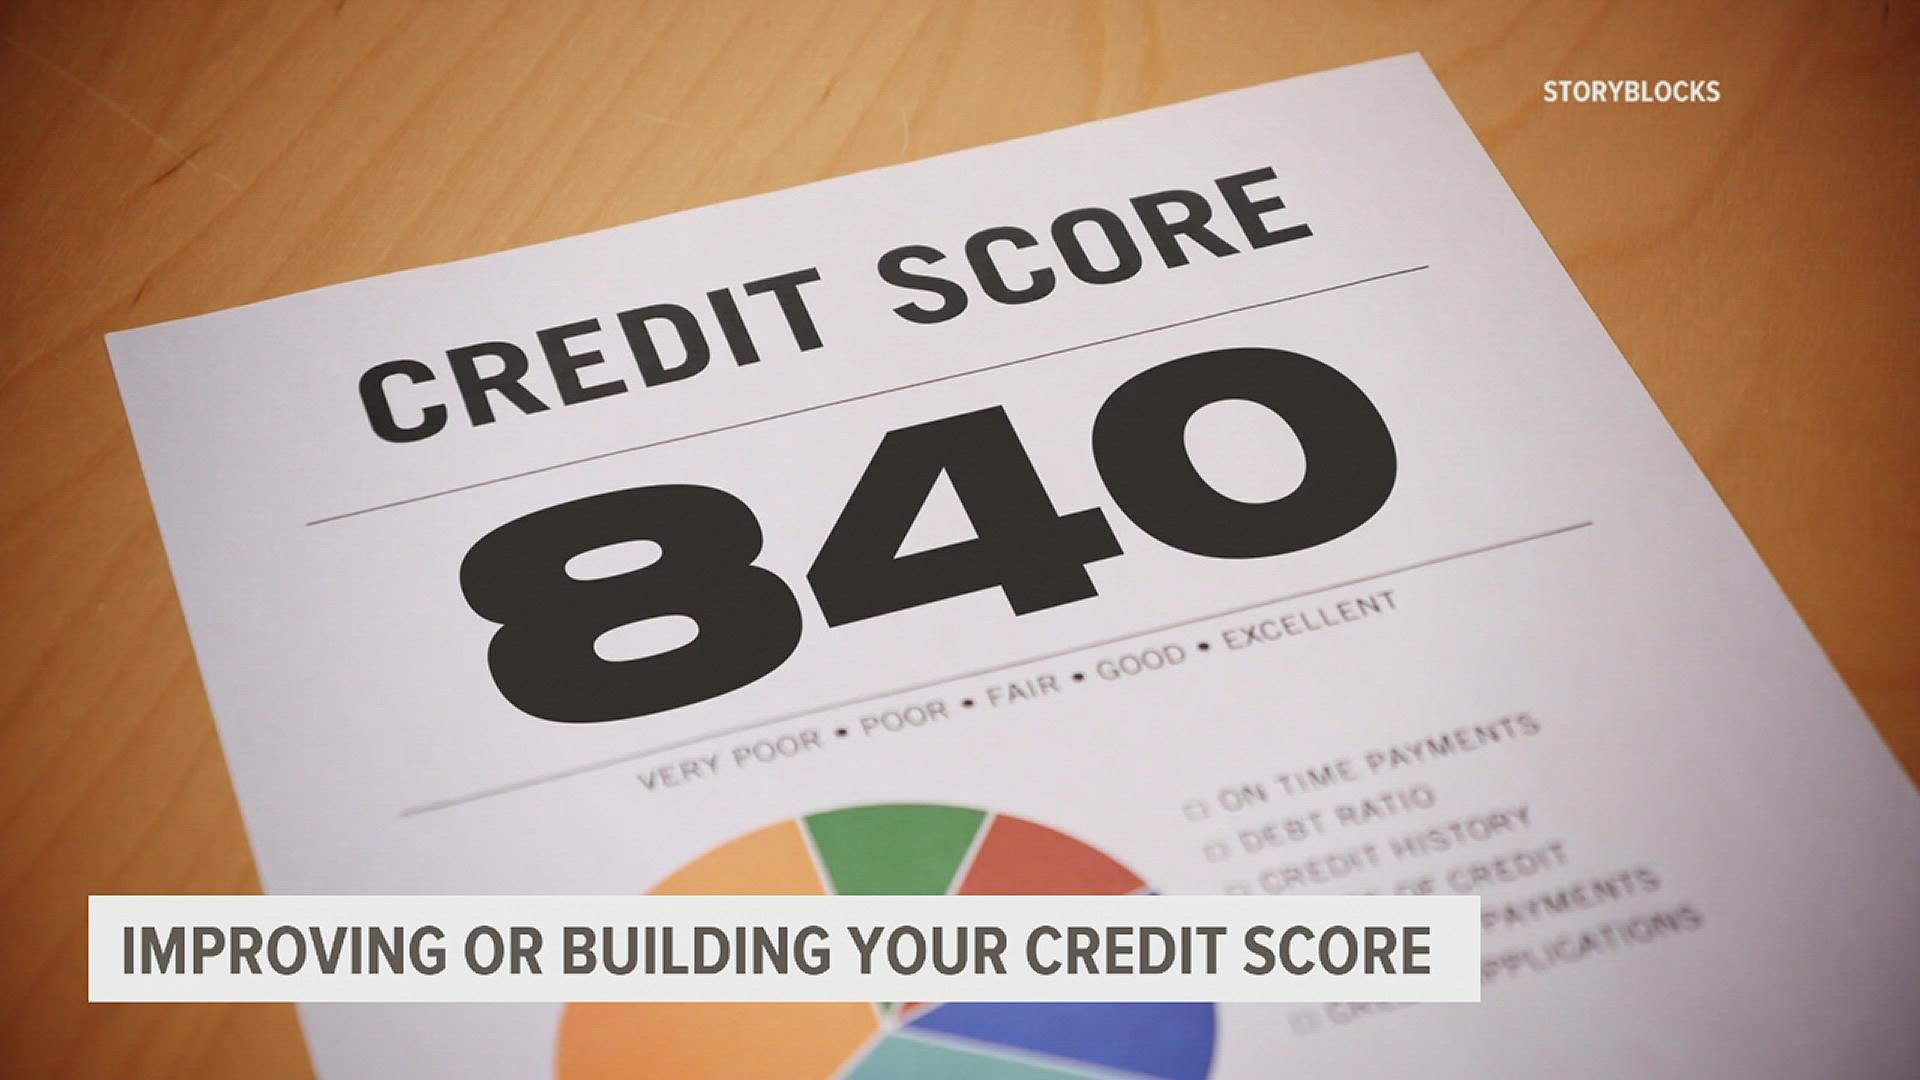 Jim Degaetano, president of Diamond Wealth Advisors, shared some tips on how to build and/or improve your credit score on FOX43 Morning News.